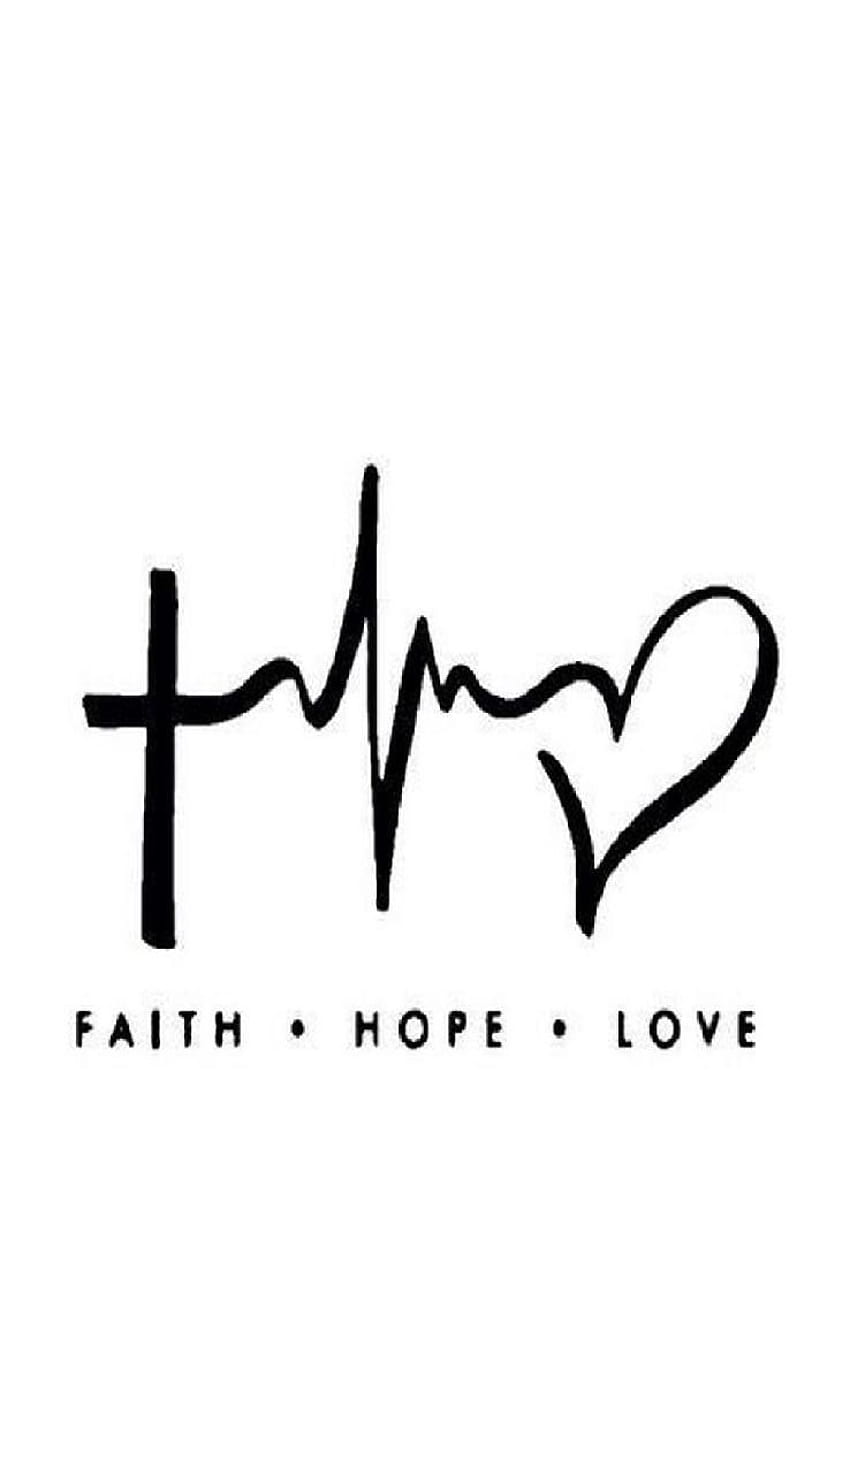 hope by hanymaxasy now. Browse millions of popular bass and ringtones on Zedge…, faith hope love HD phone wallpaper